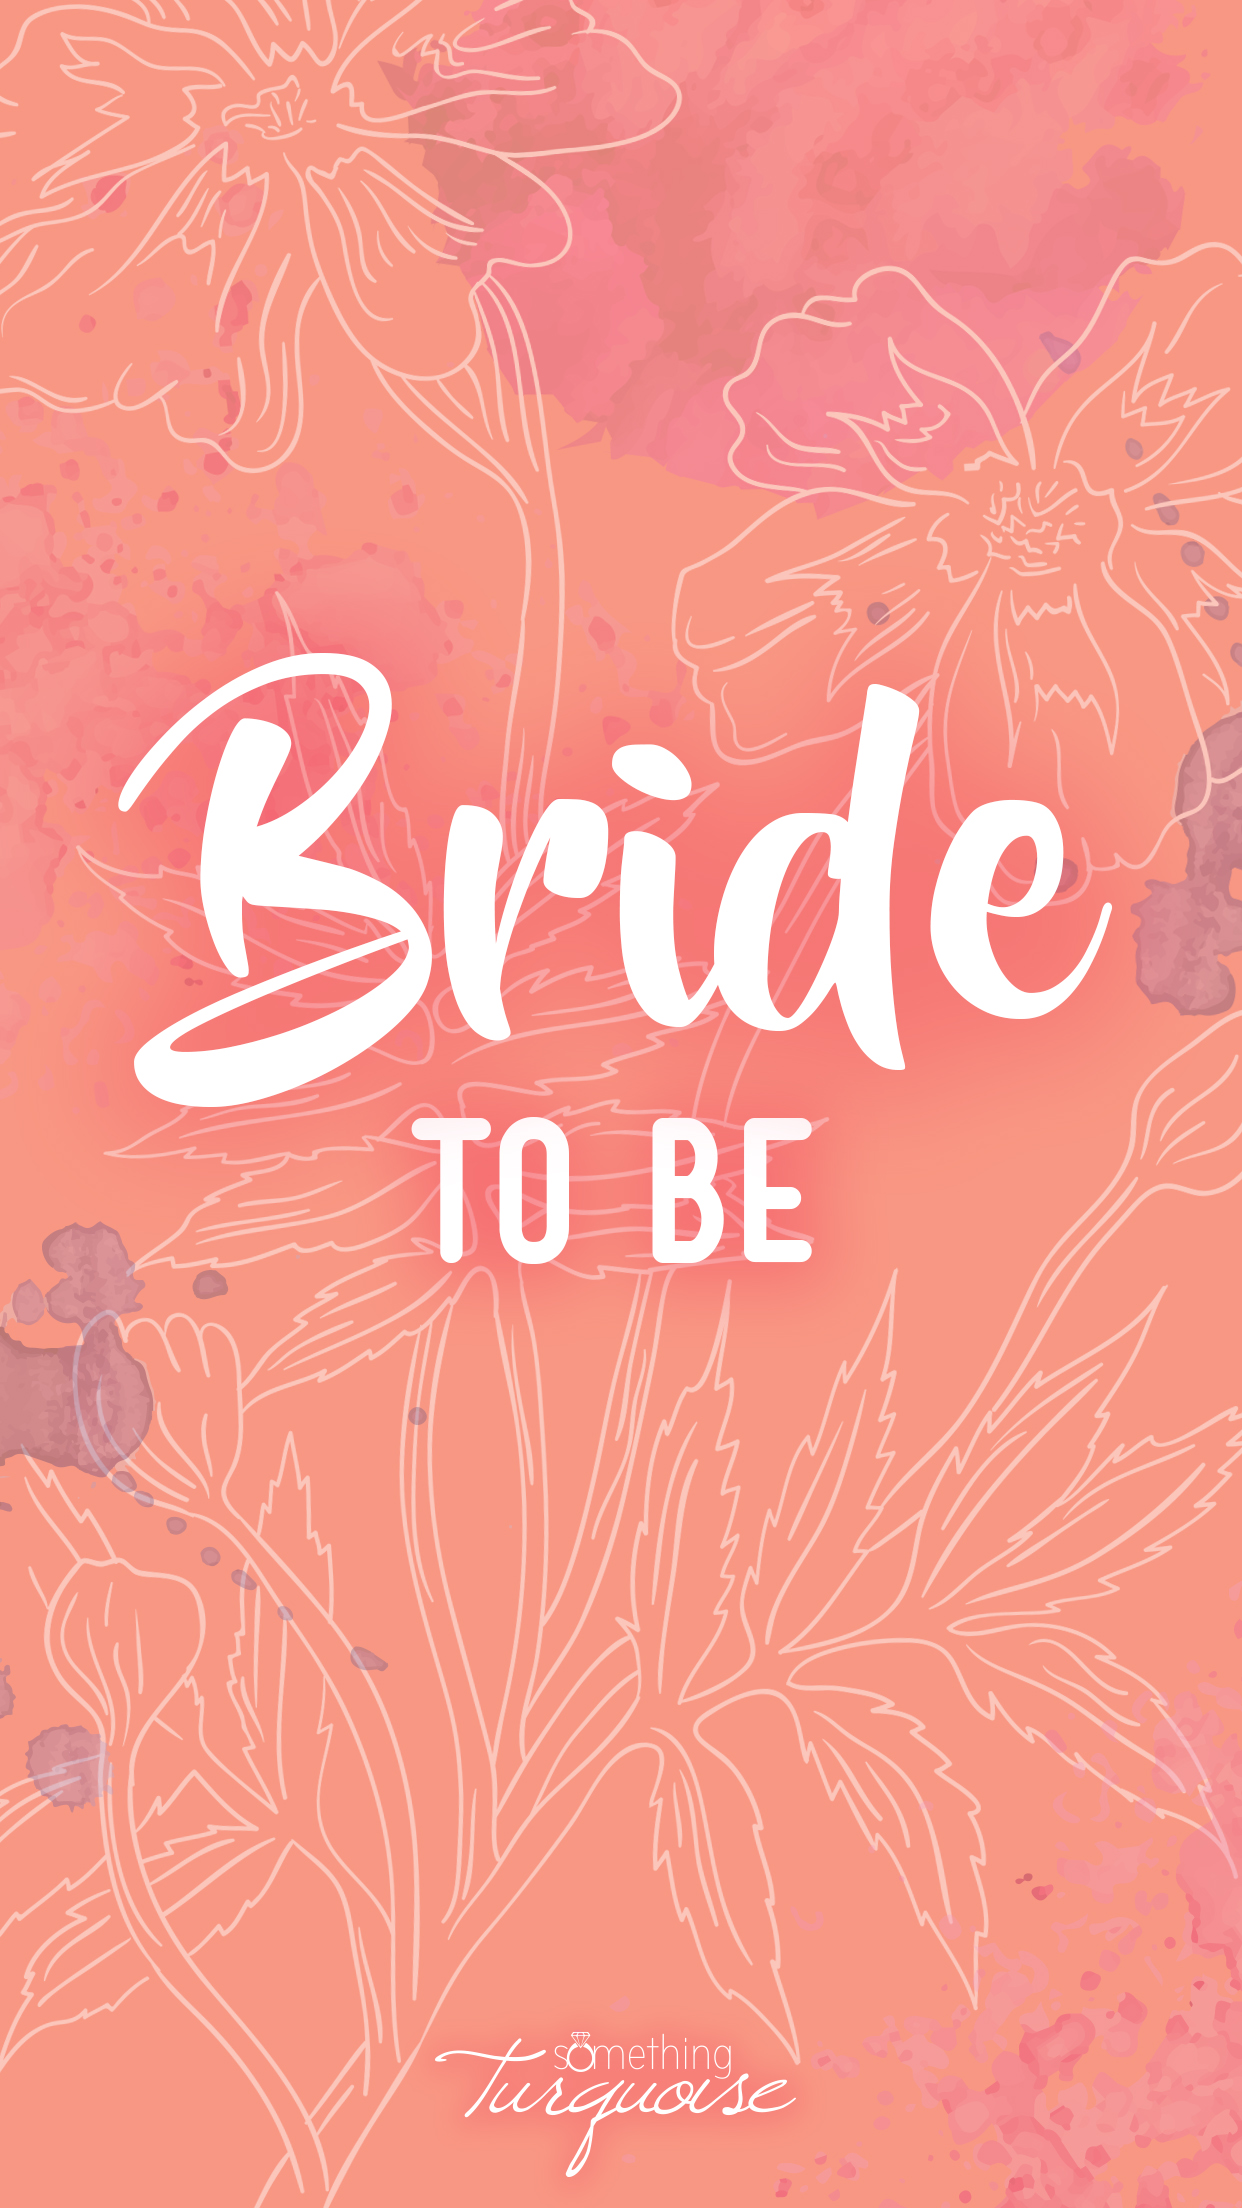 Awesome Bride To Be smartphone wallpaper and lock screen, SO cute!!